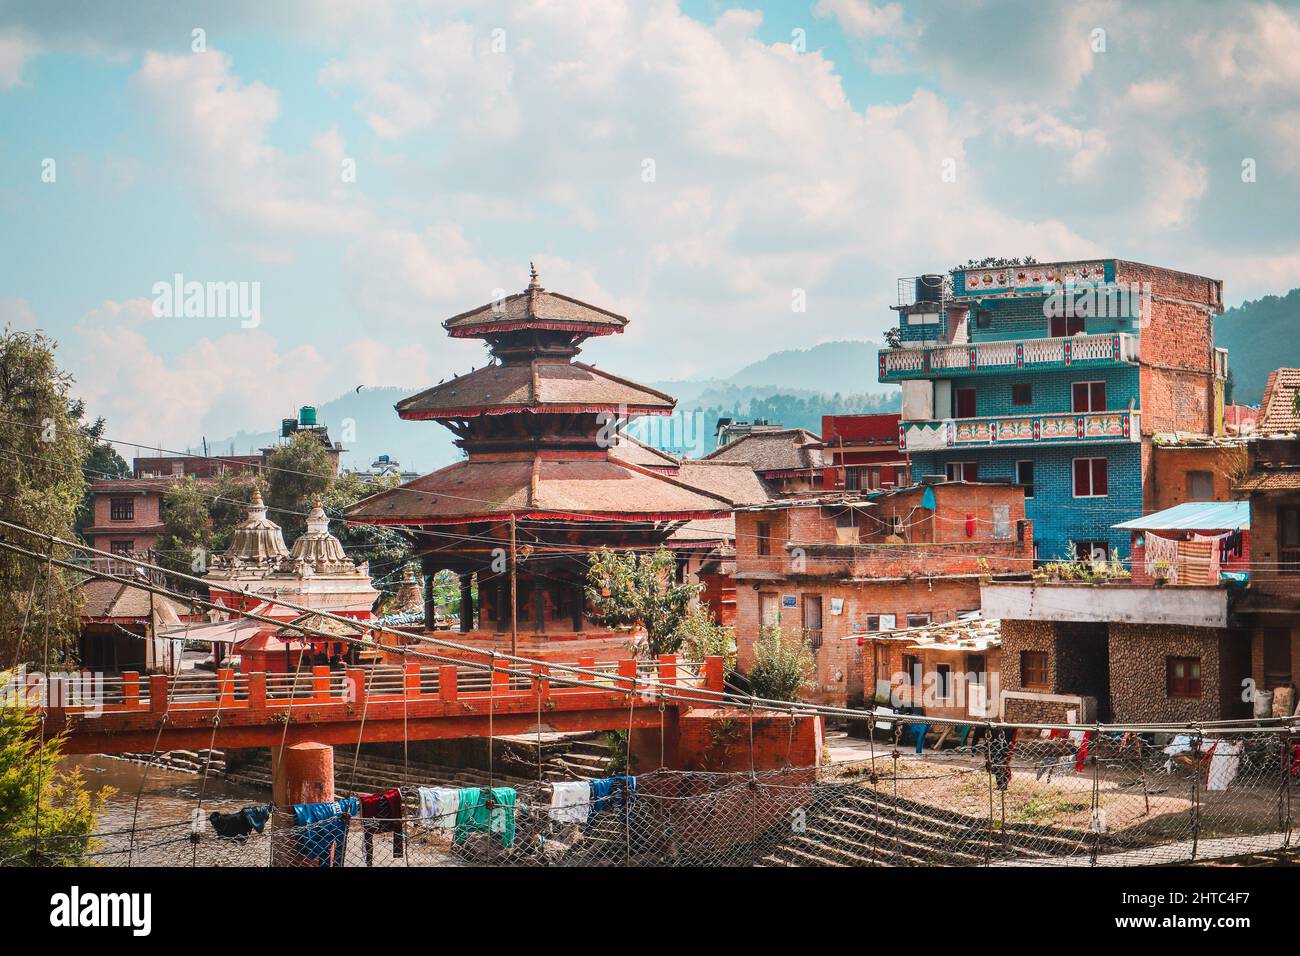 view onto the river and temple complex in Panauti, a beautiful newari village just outside of the Kathmandu Valley in Nepal Stock Photo